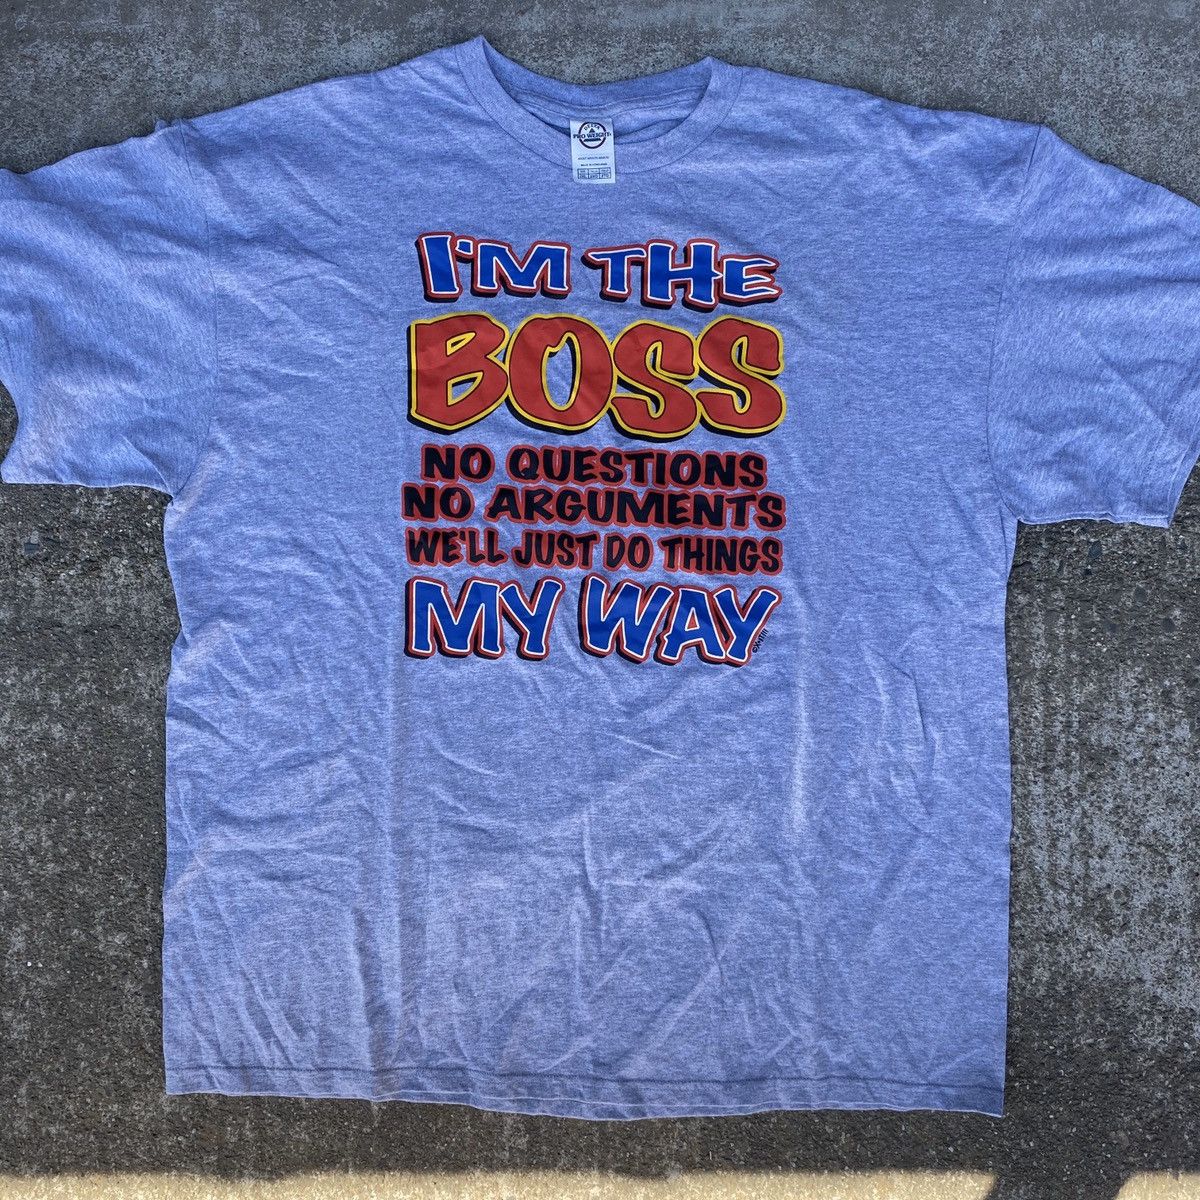 Vintage VINTAGE IM THE BOSS FUNNY IRONIC T SHIRT USA DELTA Y2K 90s Size US XXL / EU 58 / 5 - 1 Preview